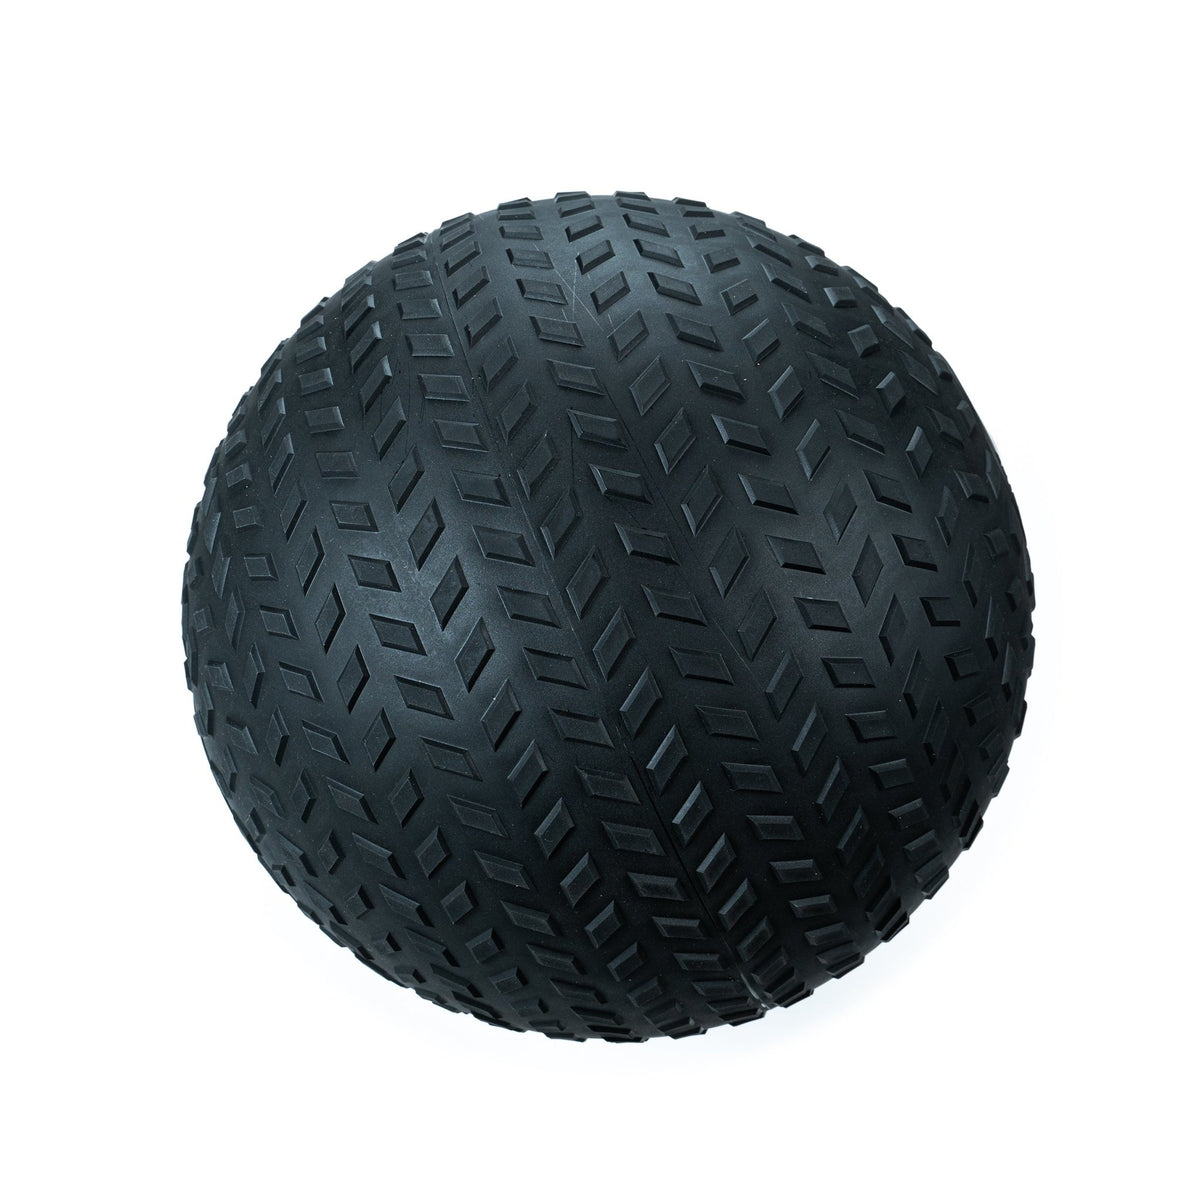 FitWay Equip. Max Grip Slam Ball - 10 Lbs 